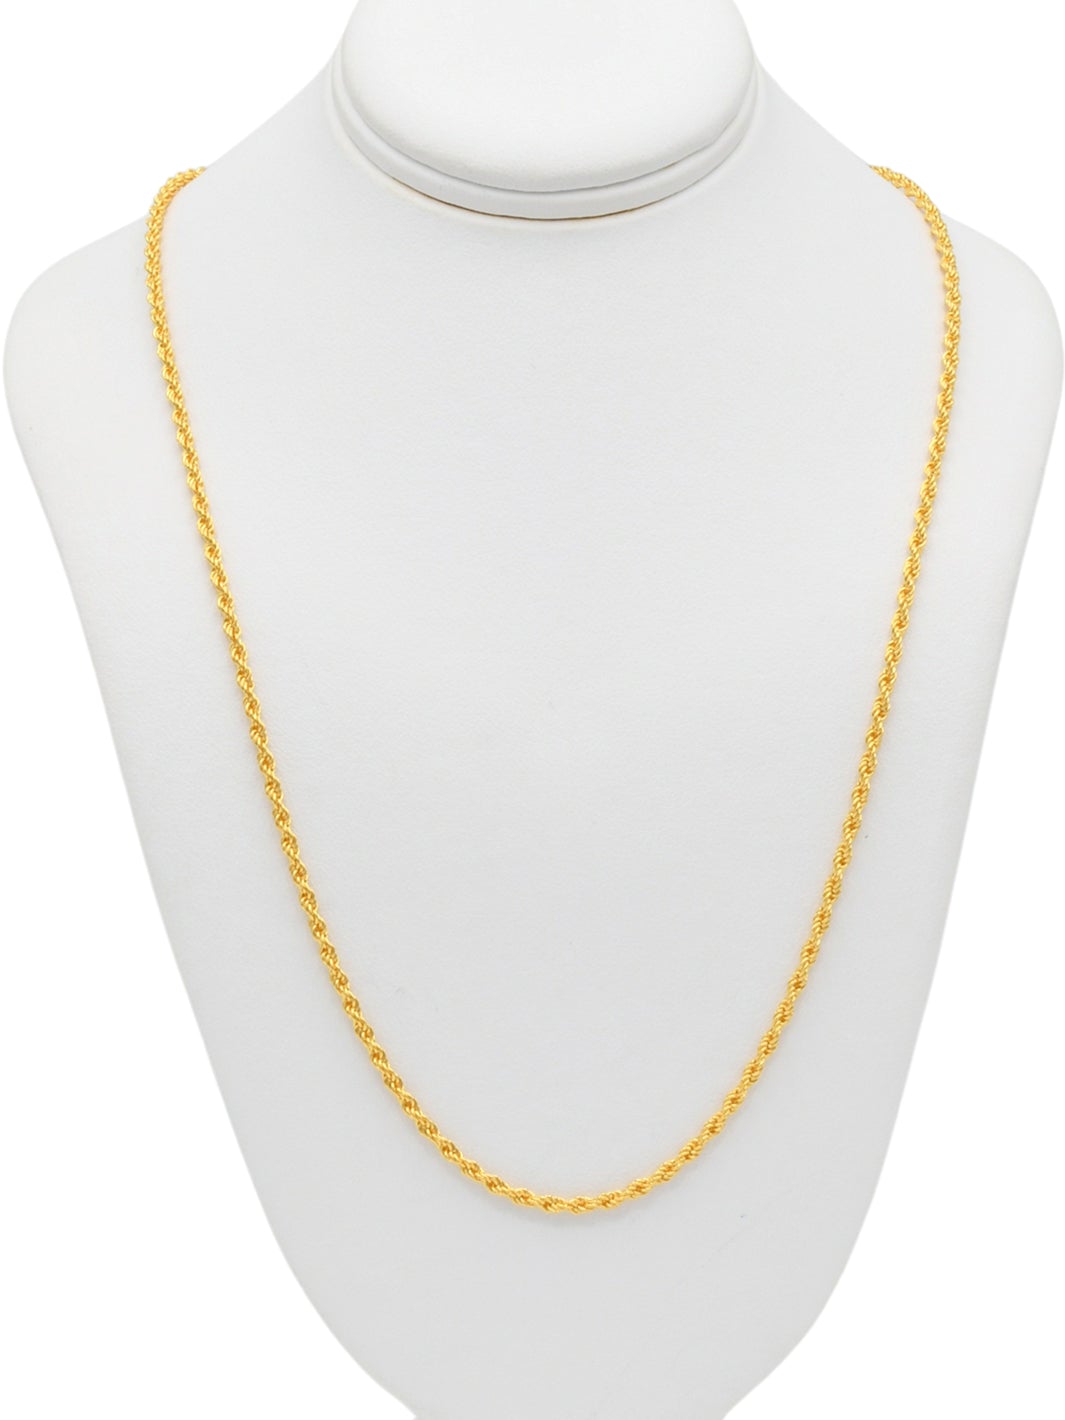 22ct Gold Hollow Rope Chain - 40 CM - Roop Darshan